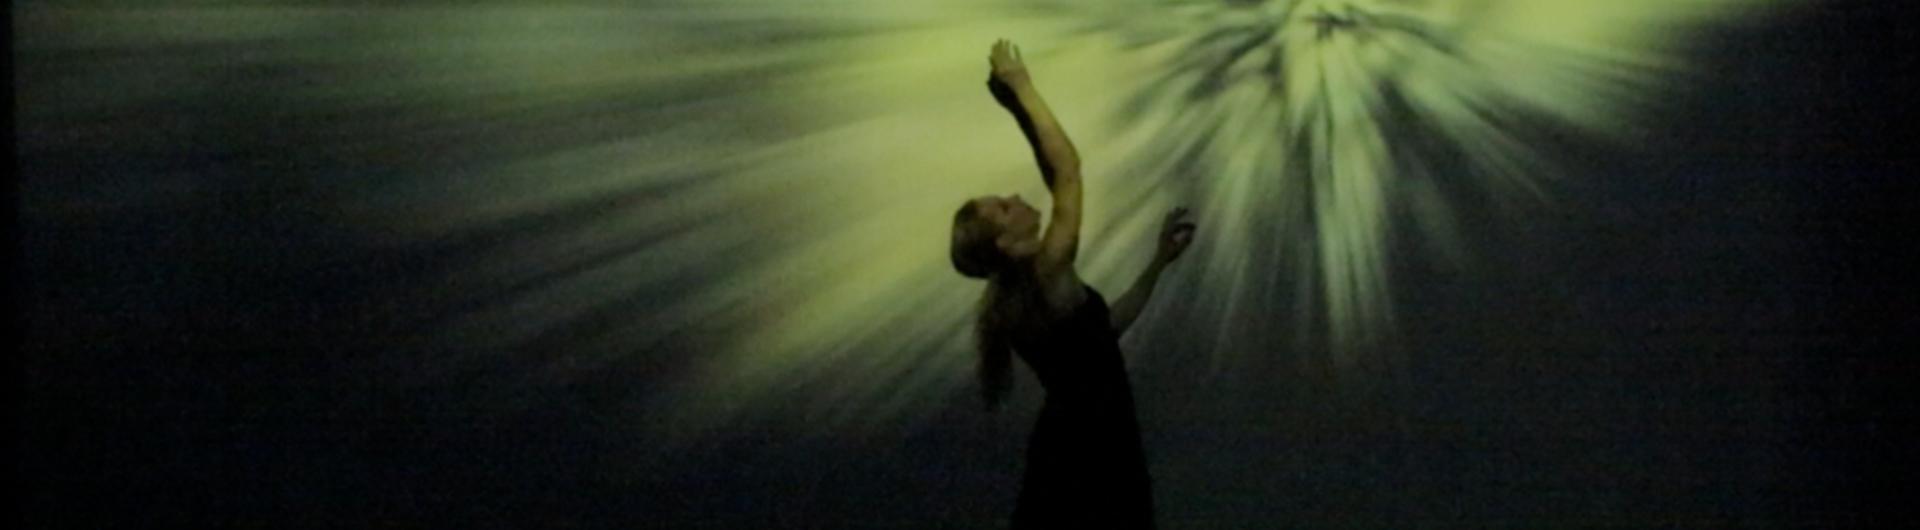 Francesca dances in front of green projection